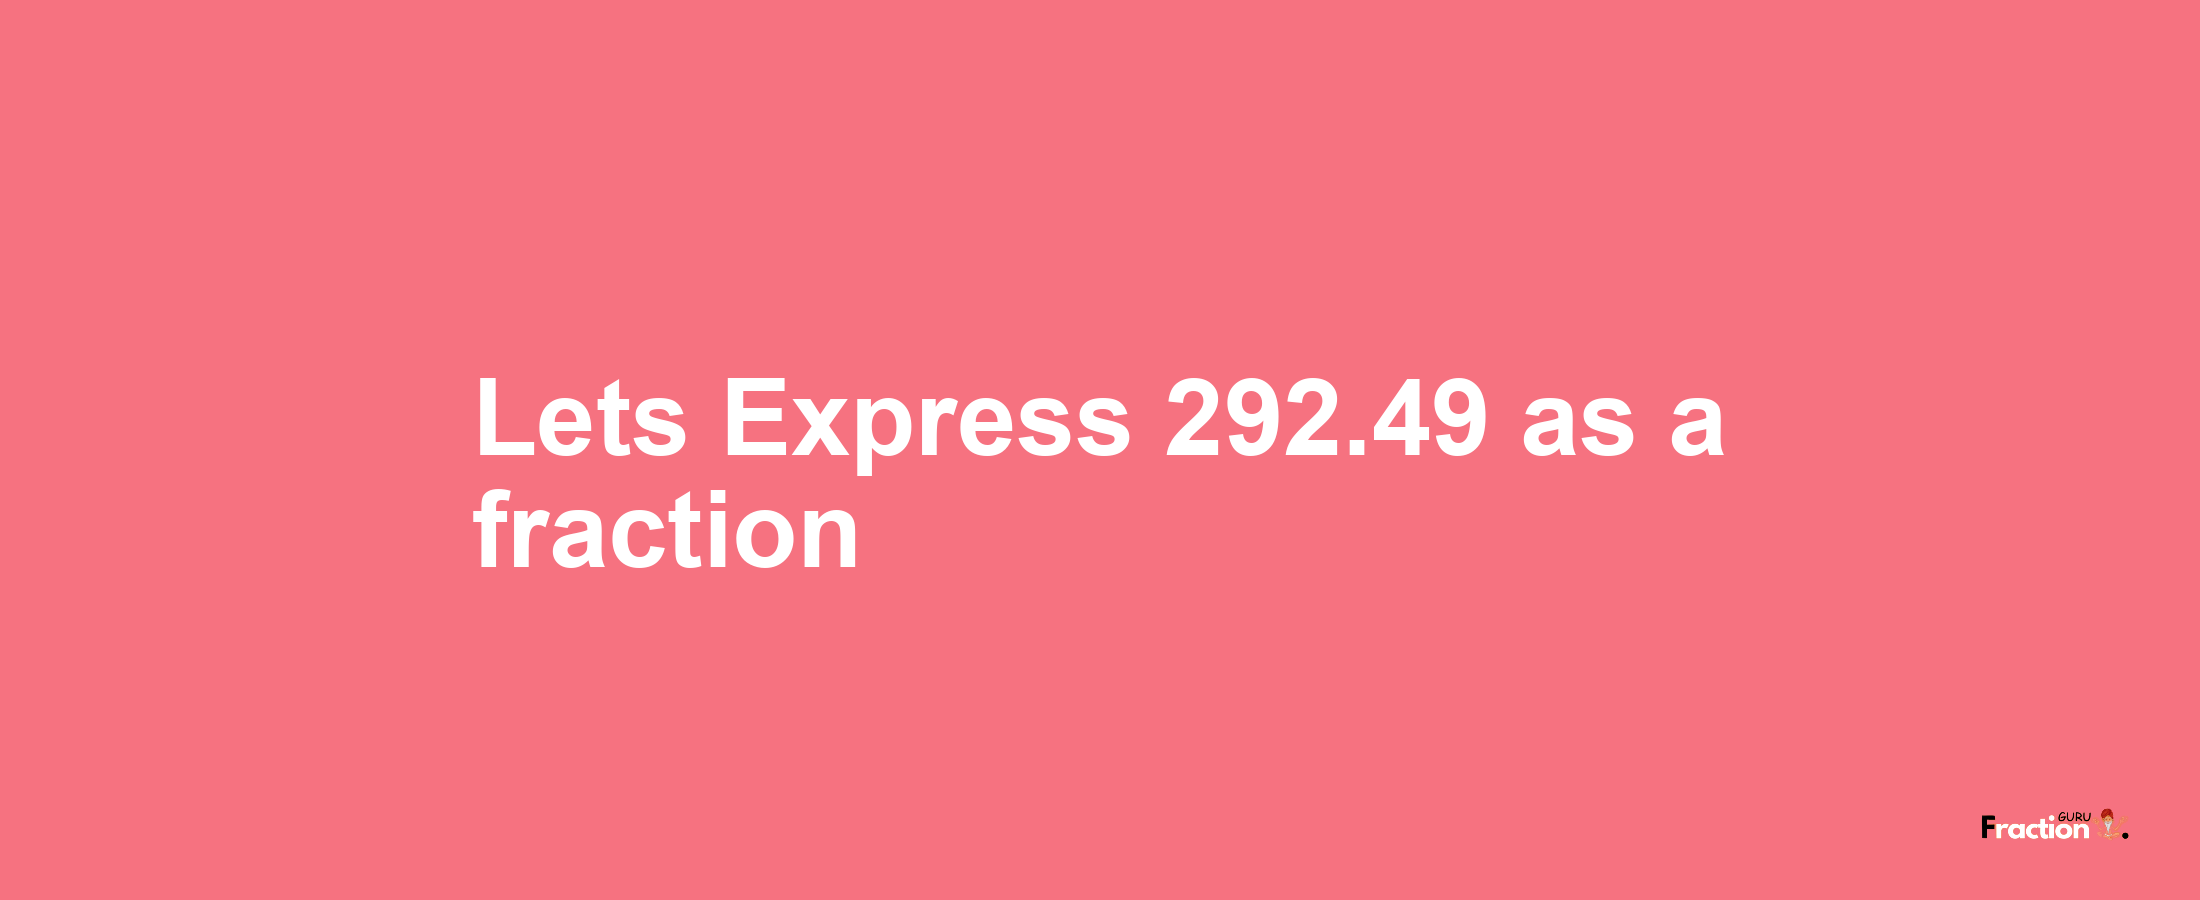 Lets Express 292.49 as afraction